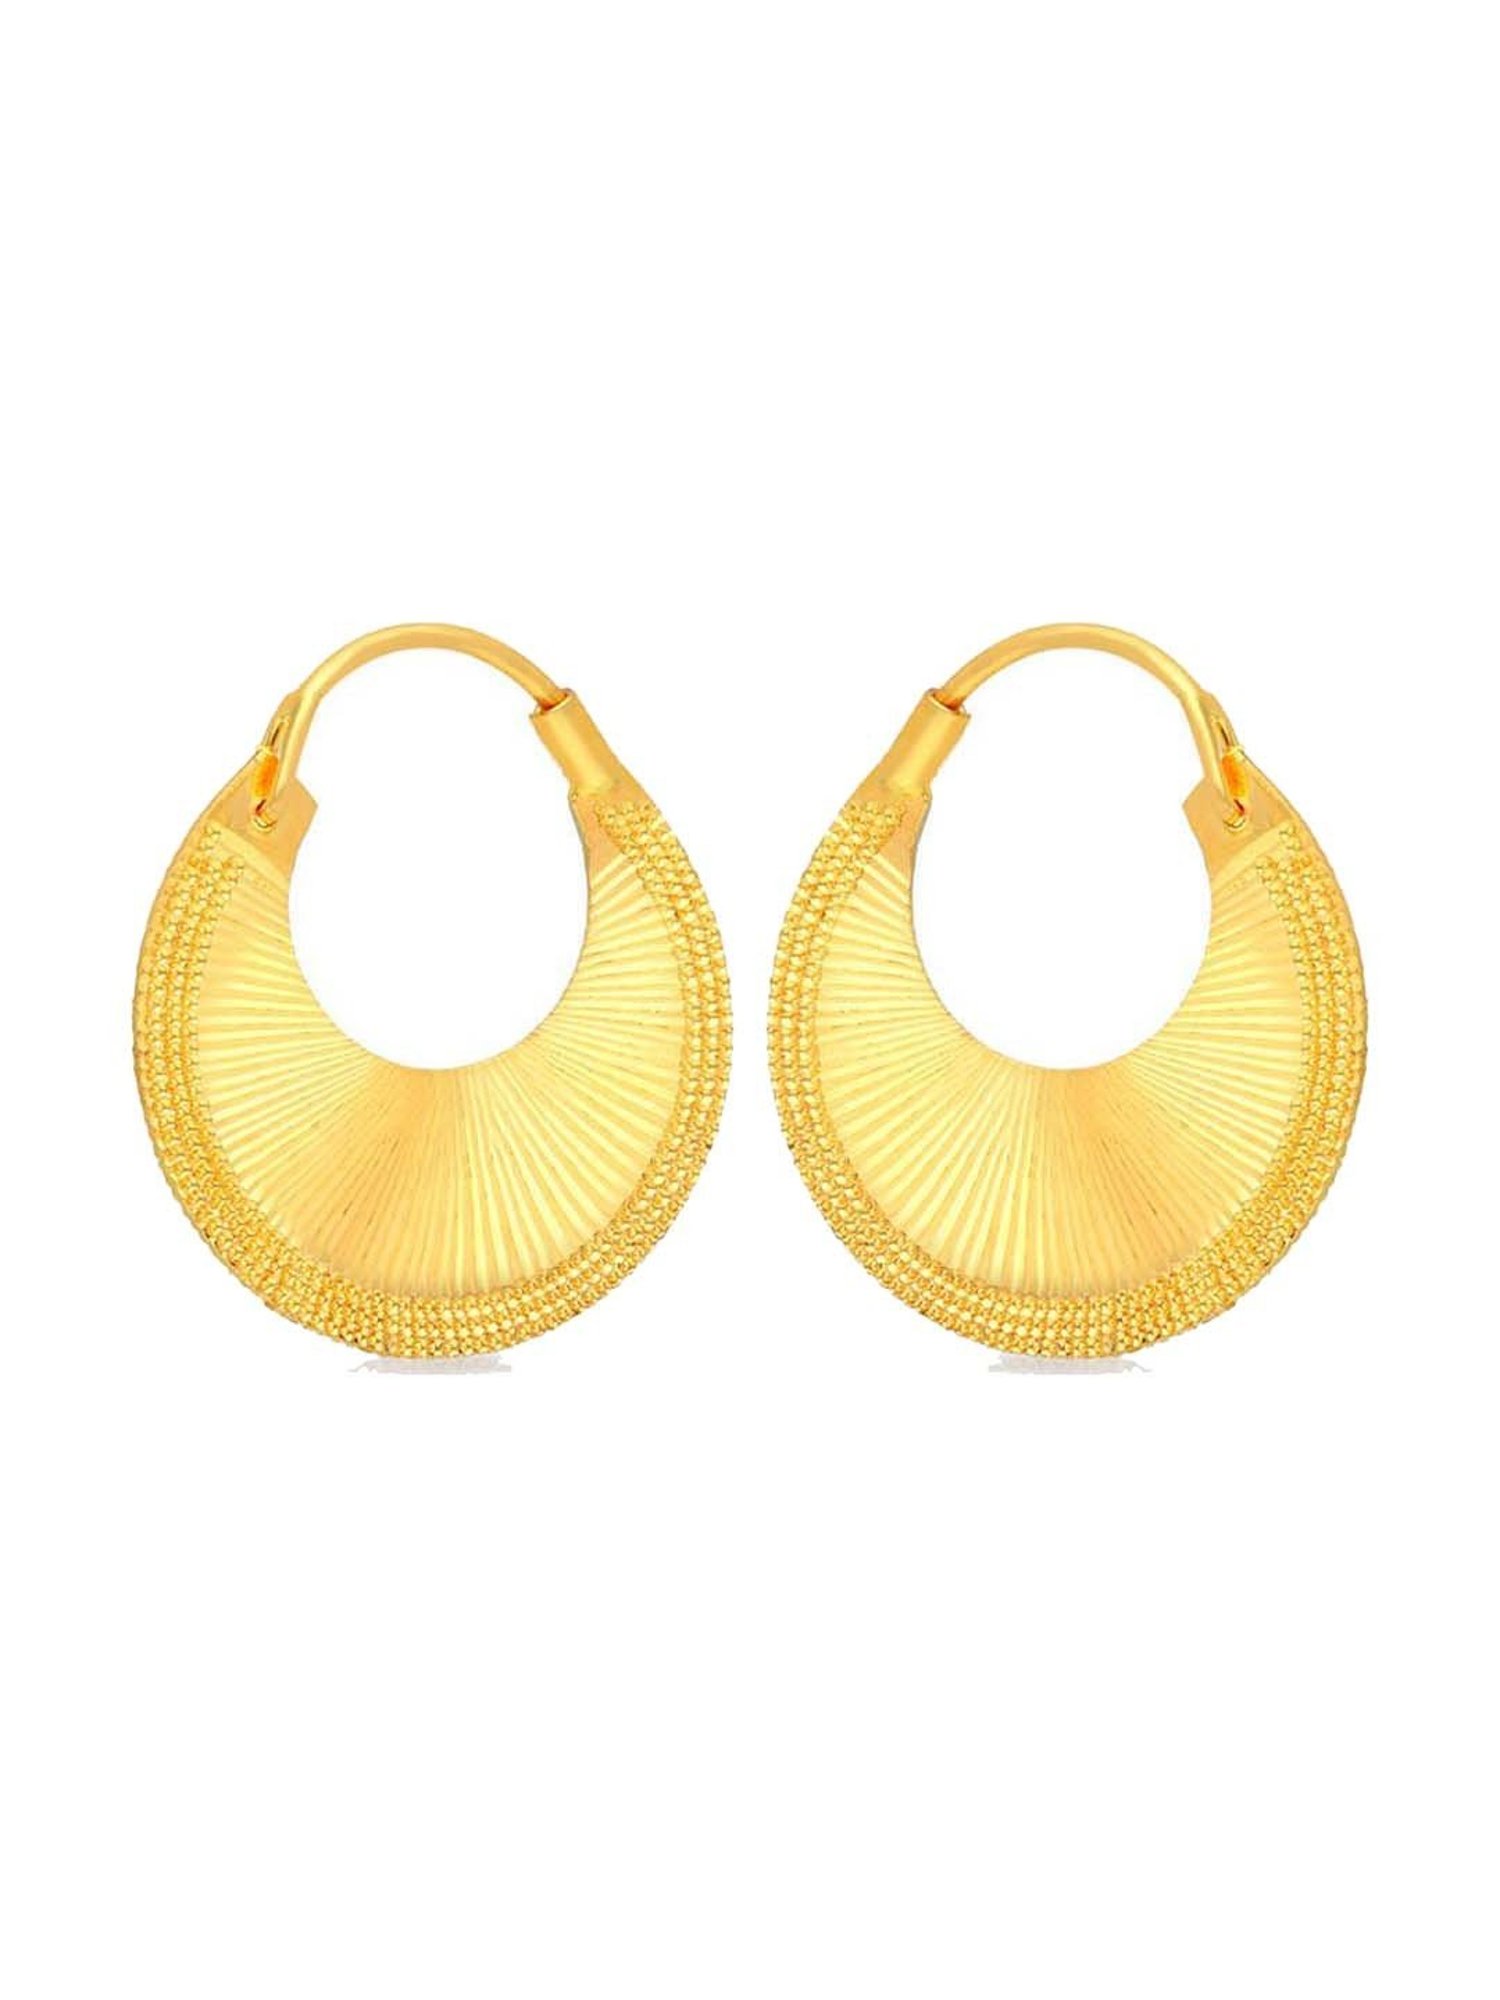 22k Gold Hoop Earrings for a perfect contemporary look by Giriraj Jewellers   ADD some gold touches to your collection with 22k Gold Hoop  Instagram